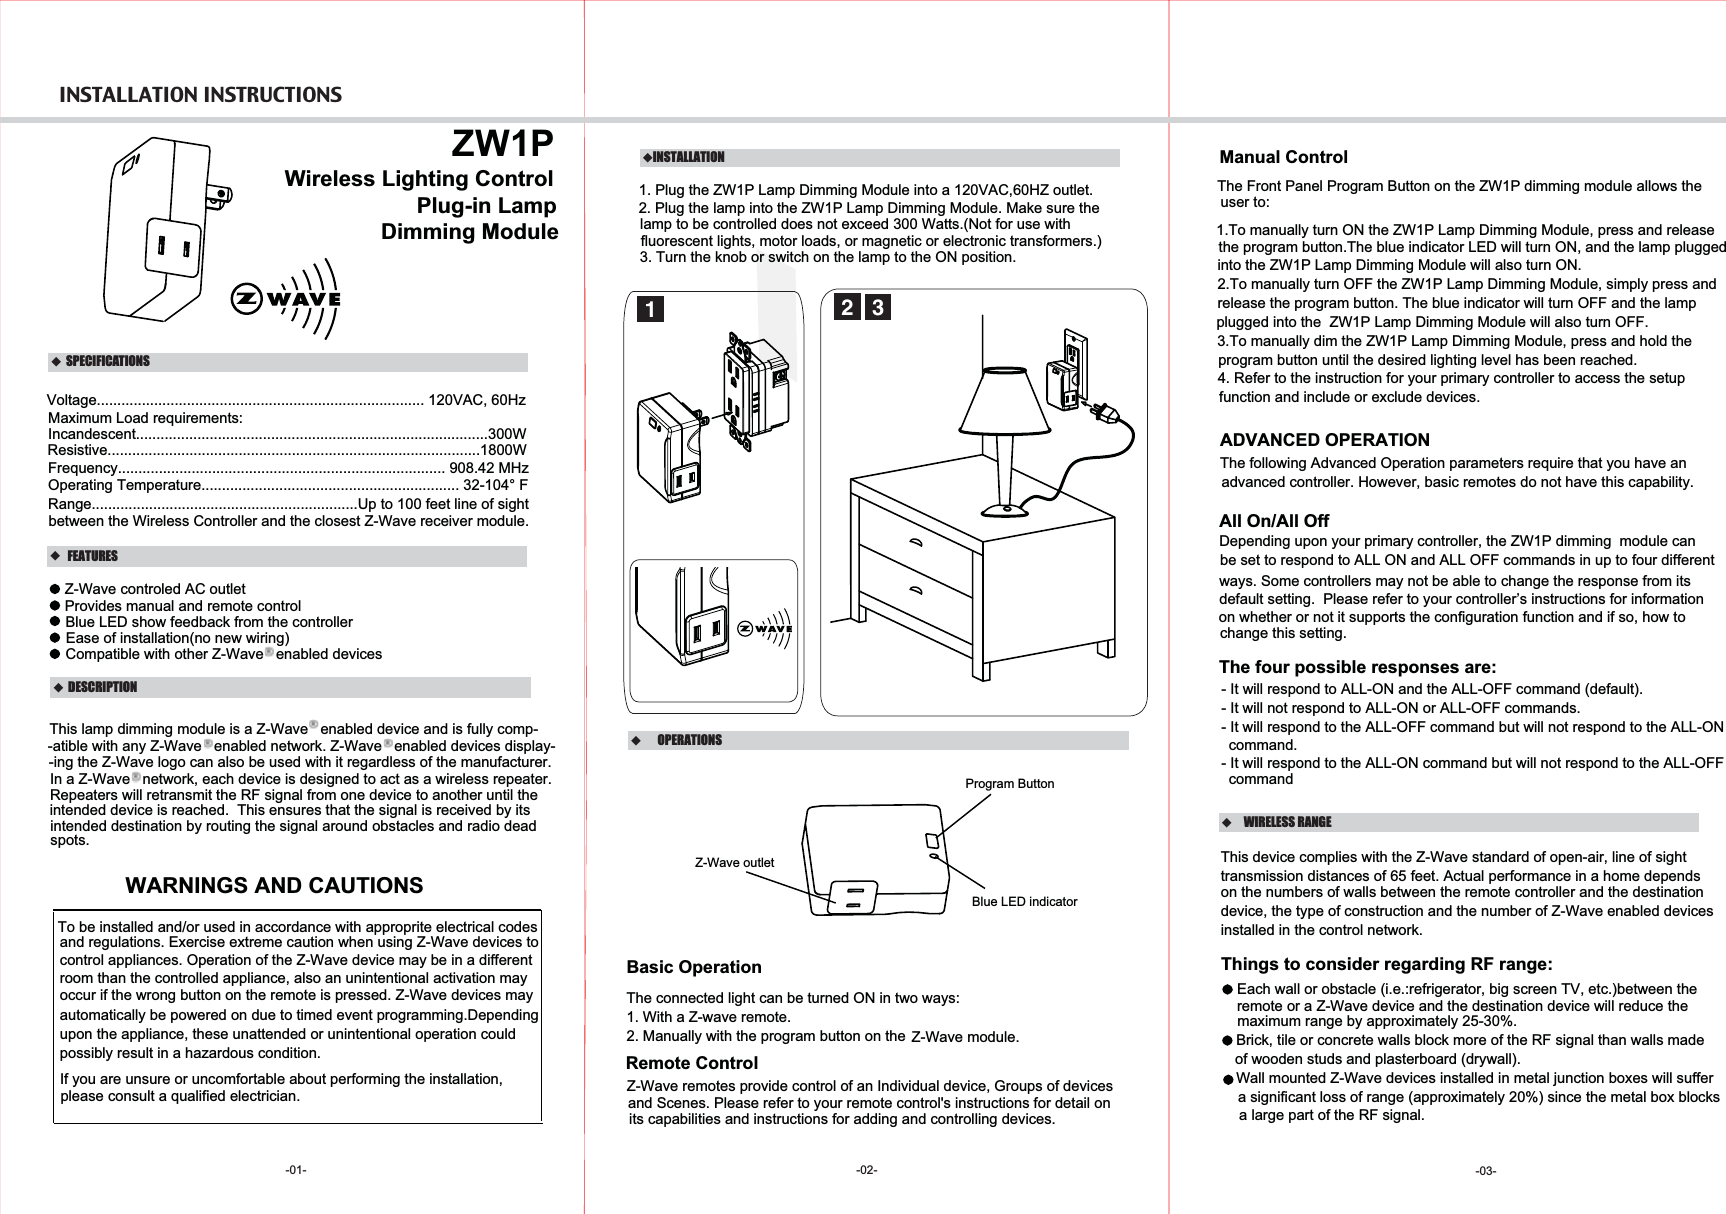  INSTALLATION INSTRUCTIONS -01-   DESCRIPTION FEATURES    ZW1PPlug-in Lamp Voltage................................................................................ 120VAC, 60HzMaximum Load requirements:Incandescent......................................................................................300WFrequency................................................................................ 908.42 MHzOperating Temperature............................................................... 32-104° FRange.................................................................Up to 100 feet line of sight between the Wireless Controller and the closest Z-Wave receiver module.Wireless Lighting Control  SPECIFICATIONSDimming ModuleResistive...........................................................................................1800WIn a Z-Wave   network, each device is designed to act as a wireless repeater.WARNINGS AND CAUTIONS-02-  OPERATIONSBasic OperationThe connected light can be turned ON in two ways:1. With a Z-wave remote.2. Manually with the program button on the Z-Wave module.Remote ControlZ-Wave remotes provide control of an Individual device, Groups of devices Manual ControlThe Front Panel Program Button on the ZW1P dimming module allows the Provides manual and remote controlBlue LED show feedback from the controllerEase of installation(no new wiring)Compatible with other Z-Wave   enabled devicesThis lamp dimming module is a Z-Wave   enabled device and is fully comp--atible with any Z-Wave   enabled network. Z-Wave   enabled devices display--ing the Z-Wave logo can also be used with it regardless of the manufacturer.Repeaters will retransmit the RF signal from one device to another until the intended device is reached.  This ensures that the signal is received by its intended destination by routing the signal around obstacles and radio dead spots.INSTALLATION1. Plug the ZW1P Lamp Dimming Module into a 120VAC,60HZ outlet.22. Plug the lamp into the ZW1P Lamp Dimming Module. Make sure the    lamp to be controlled does not exceed 300 Watts.(Not for use with fluorescent lights, motor loads, or magnetic or electronic transformers.)3. Turn the knob or switch on the lamp to the ON position.31.To manually turn ON the ZW1P Lamp Dimming Module, press and release  the program button.The blue indicator LED will turn ON, and the lamp pluggedinto the ZW1P Lamp Dimming Module will also turn ON.2.To manually turn OFF the ZW1P Lamp Dimming Module, simply press andrelease the program button. The blue indicator will turn OFF and the lampplugged into the  ZW1P Lamp Dimming Module will also turn OFF.3.To manually dim the ZW1P Lamp Dimming Module, press and hold theprogram button until the desired lighting level has been reached.1Z-Wave outletProgram ButtonThe four possible responses are:- It will respond to ALL-ON and the ALL-OFF command (default).- It will not respond to ALL-ON or ALL-OFF commands.- It will respond to the ALL-OFF command but will not respond to the ALL-ONcommand.- It will respond to the ALL-ON command but will not respond to the ALL-OFFcommandAll On/All OffDepending upon your primary controller, the ZW1P dimming  module can  be set to respond to ALL ON and ALL OFF commands in up to four different ways. Some controllers may not be able to change the response from its default setting.  Please refer to your controller’s instructions for information on whether or not it supports the configuration function and if so, how to advanced controller. However, basic remotes do not have this capability.ADVANCED OPERATIONThe following Advanced Operation parameters require that you have an To be installed and/or used in accordance with approprite electrical codes  please consult a qualified electrician.and regulations. Exercise extreme caution when using Z-Wave devices to control appliances. Operation of the Z-Wave device may be in a differentroom than the controlled appliance, also an unintentional activation mayoccur if the wrong button on the remote is pressed. Z-Wave devices mayautomatically be powered on due to timed event programming.Depending upon the appliance, these unattended or unintentional operation couldIf you are unsure or uncomfortable about performing the installation,possibly result in a hazardous condition.Blue LED indicatorchange this setting.WIRELESS RANGEThis device complies with the Z-Wave standard of open-air, line of sight transmission distances of 65 feet. Actual performance in a home dependson the numbers of walls between the remote controller and the destination device, the type of construction and the number of Z-Wave enabled devices installed in the control network.Things to consider regarding RF range:- Each wall or obstacle (i.e.:refrigerator, big screen TV, etc.)between theremote or a Z-Wave device and the destination device will reduce the maximum range by approximately 25-30%.- Brick, tile or concrete walls block more of the RF signal than walls madeof wooden studs and plasterboard (drywall).- Wall mounted Z-Wave devices installed in metal junction boxes will suffera significant loss of range (approximately 20%) since the metal box blocks a large part of the RF signal.-03-Z-Wave controled AC outletand Scenes. Please refer to your remote control&apos;s instructions for detail on  its capabilities and instructions for adding and controlling devices.user to:4. Refer to the instruction for your primary controller to access the setupfunction and include or exclude devices.